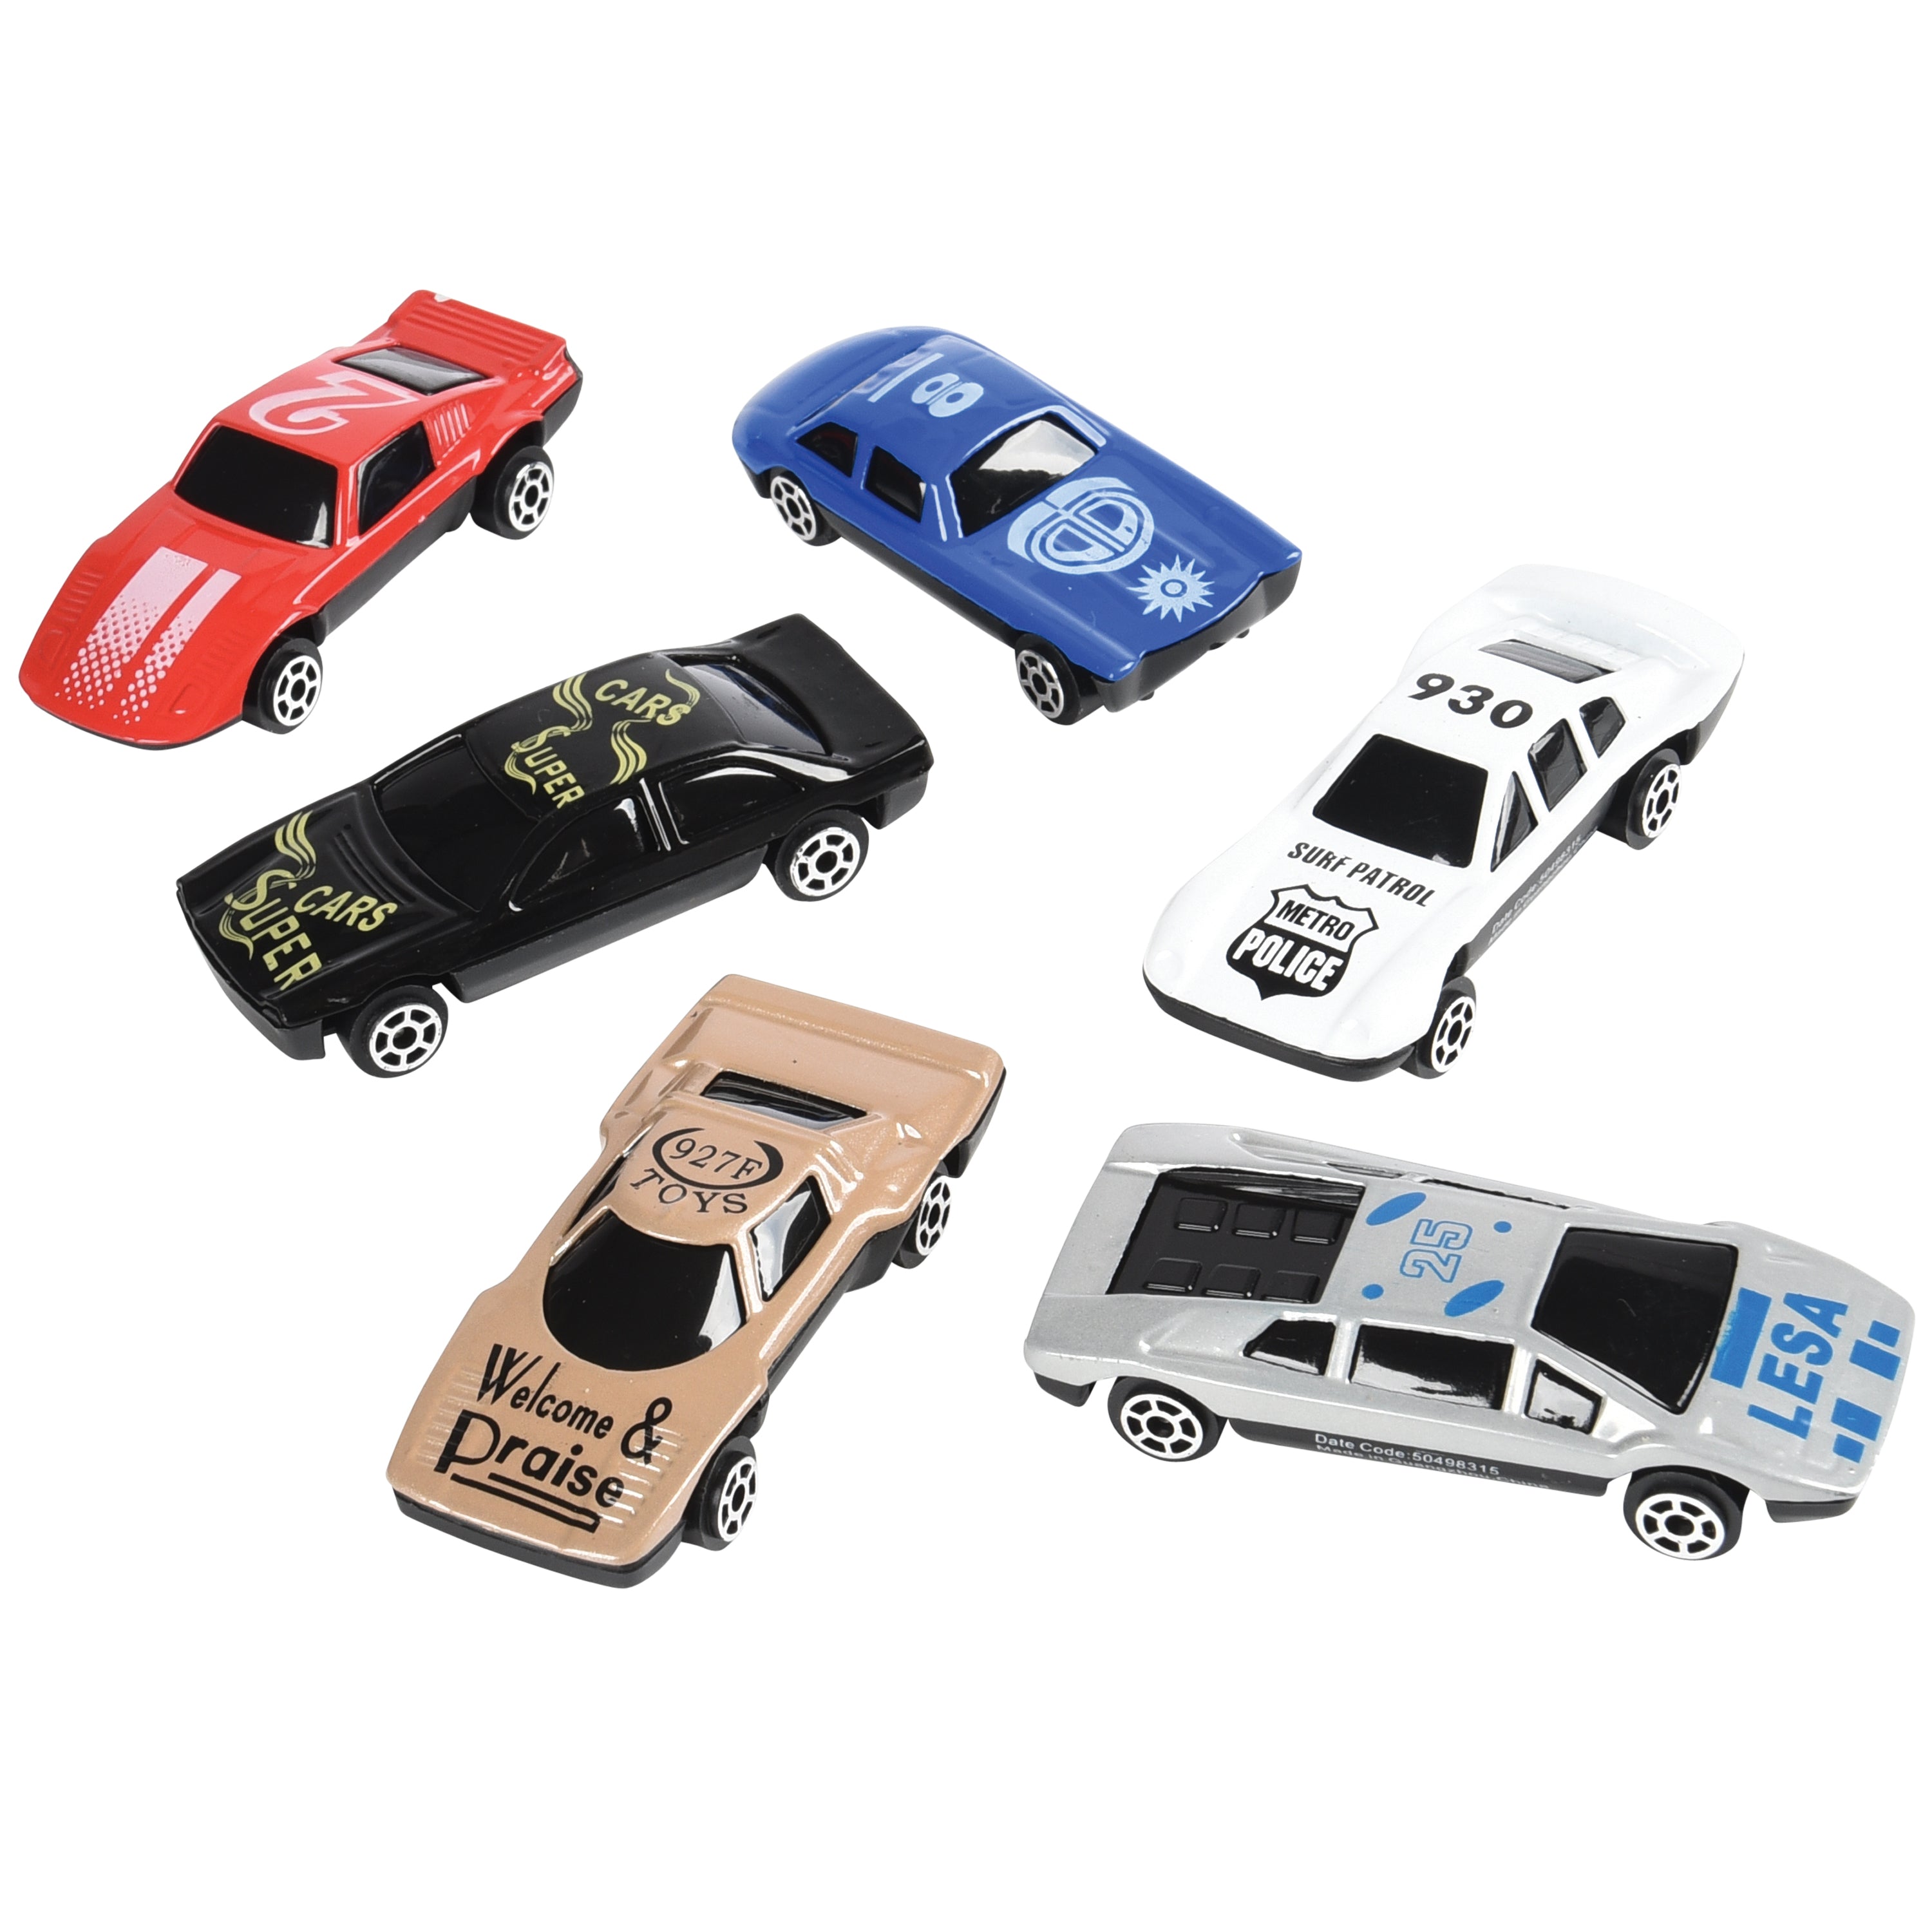 Stock Cars Toy (One Dozen) - Only $6.48 at Carnival Source